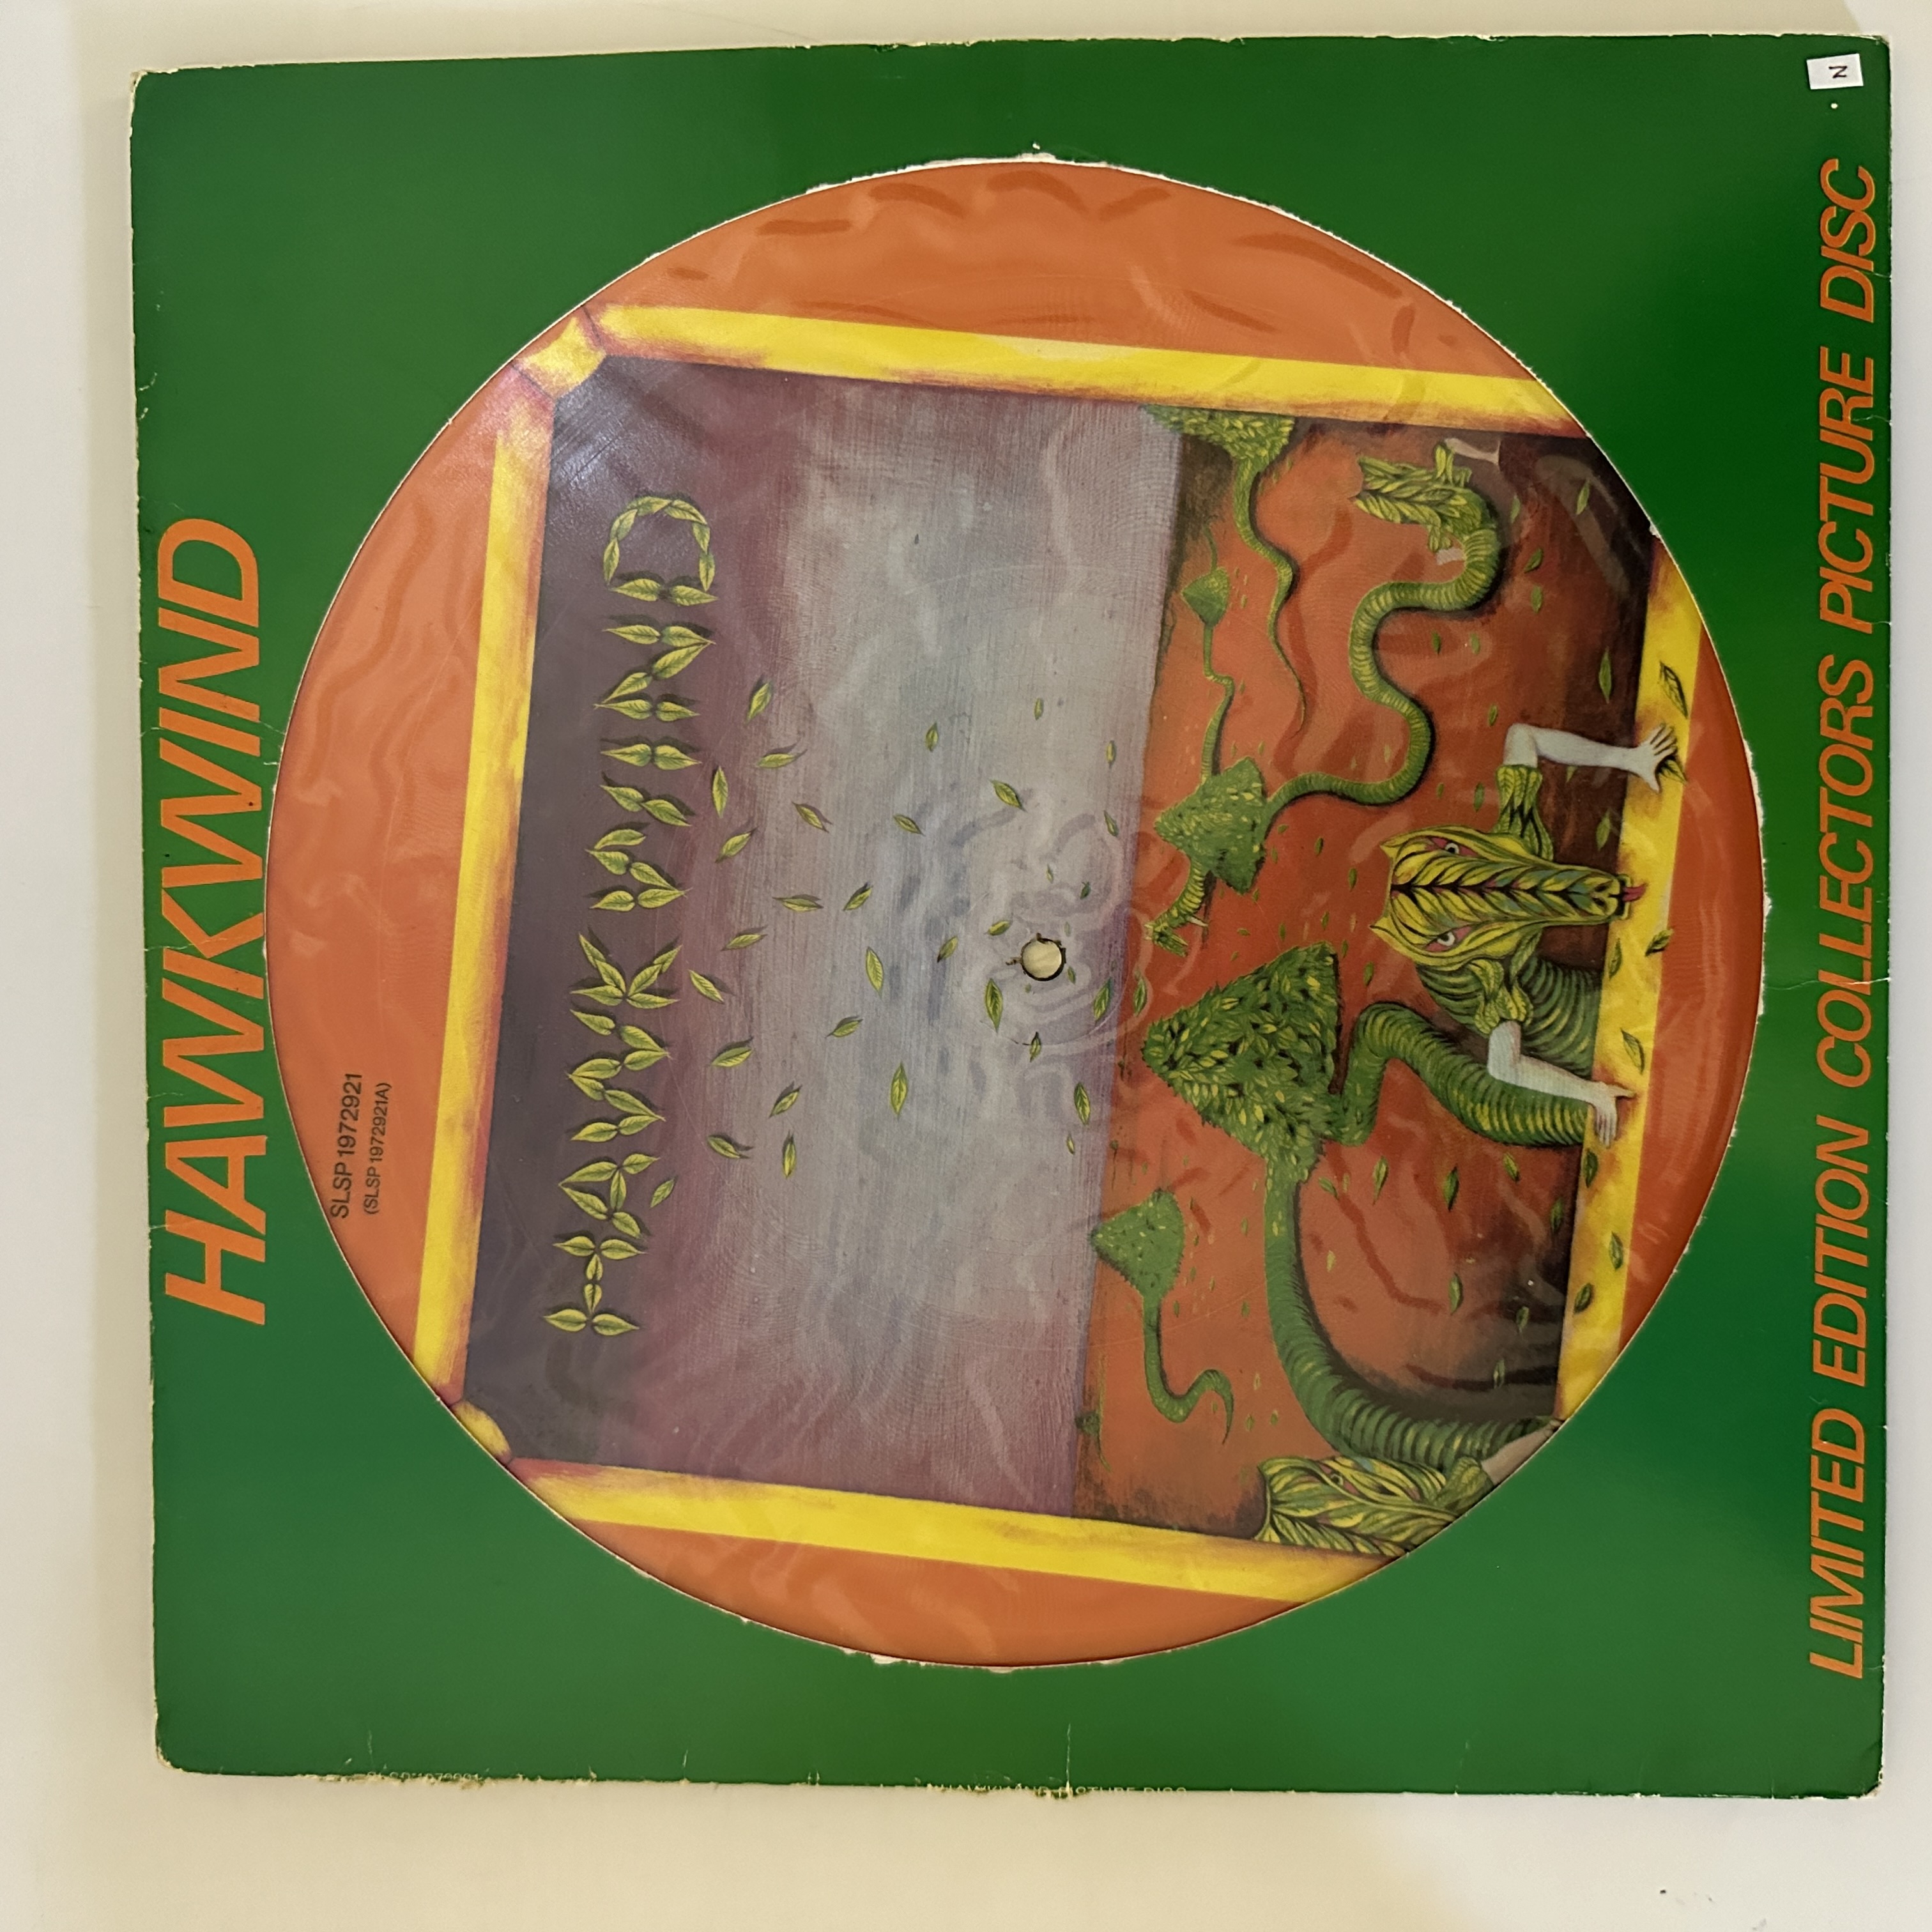 Hawkwind limited edition picture disc - Image 2 of 8